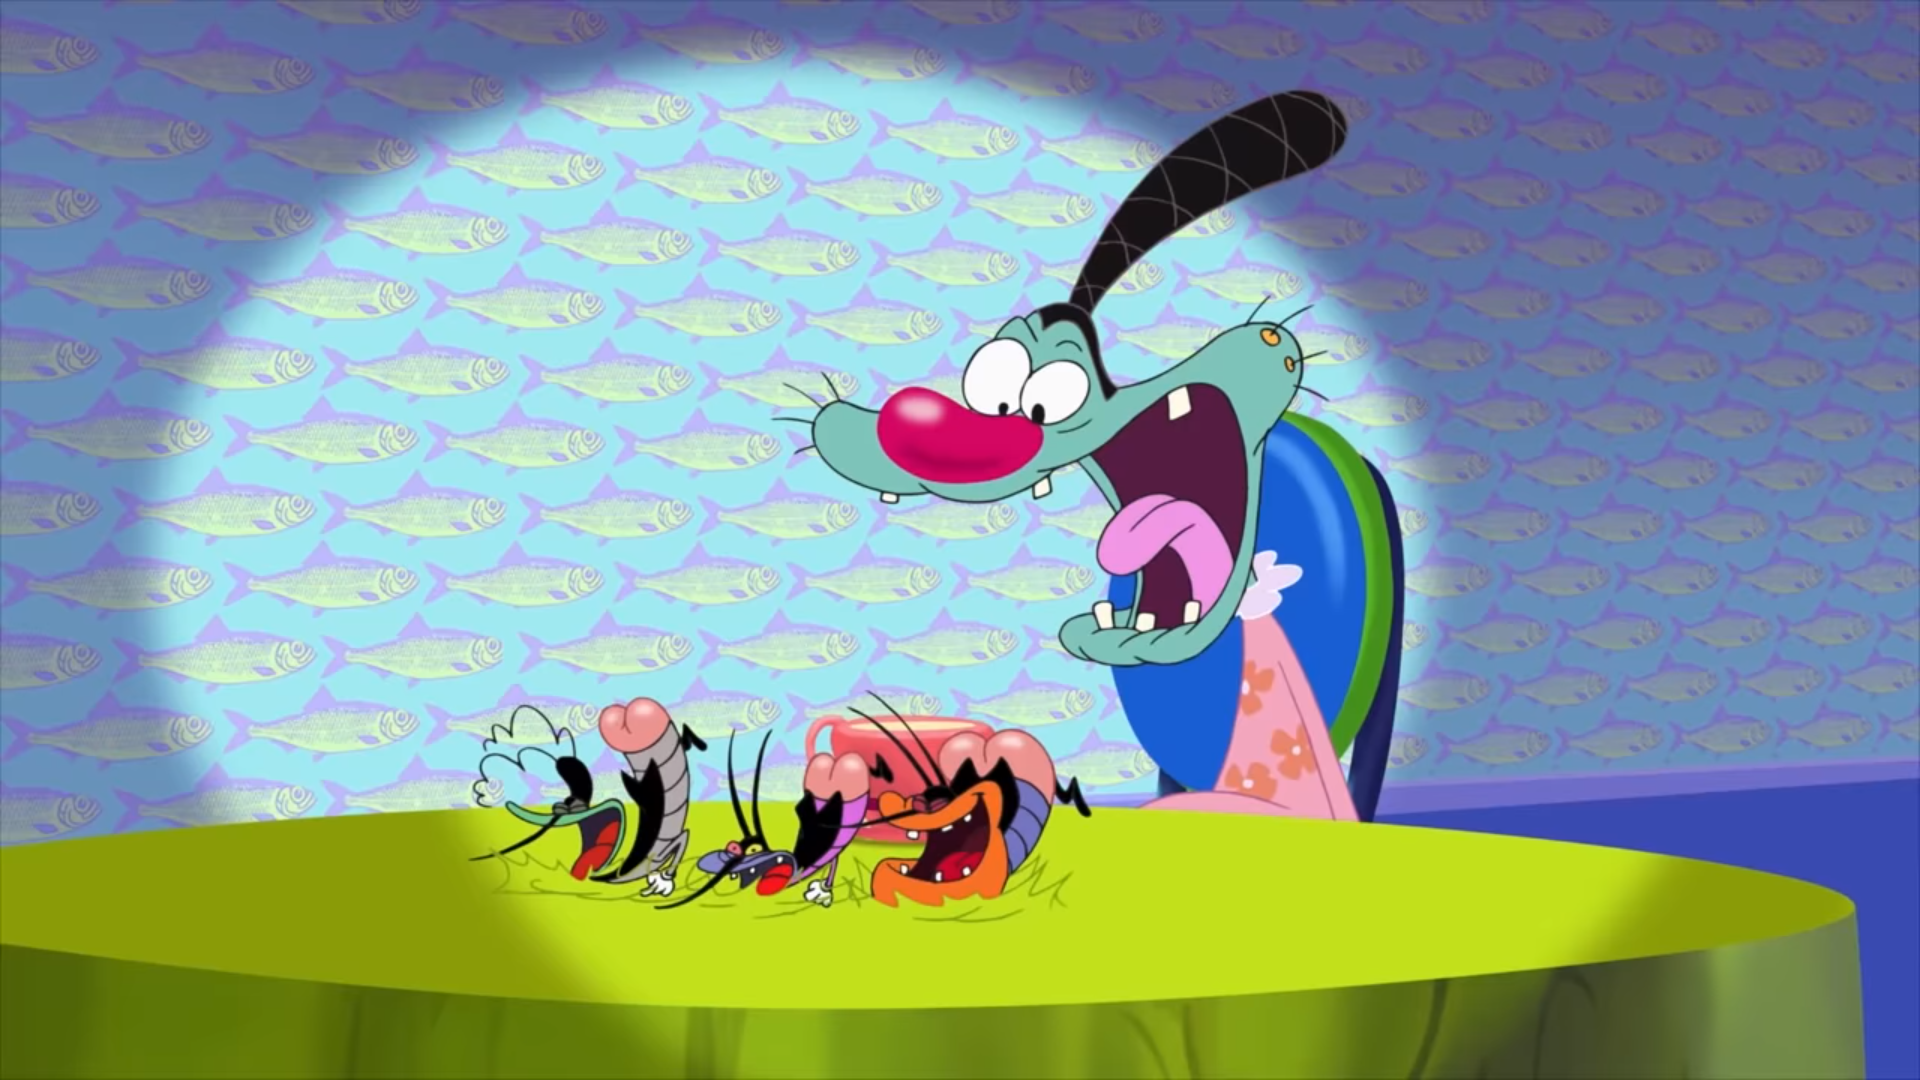 oggy and the cockroach wala game